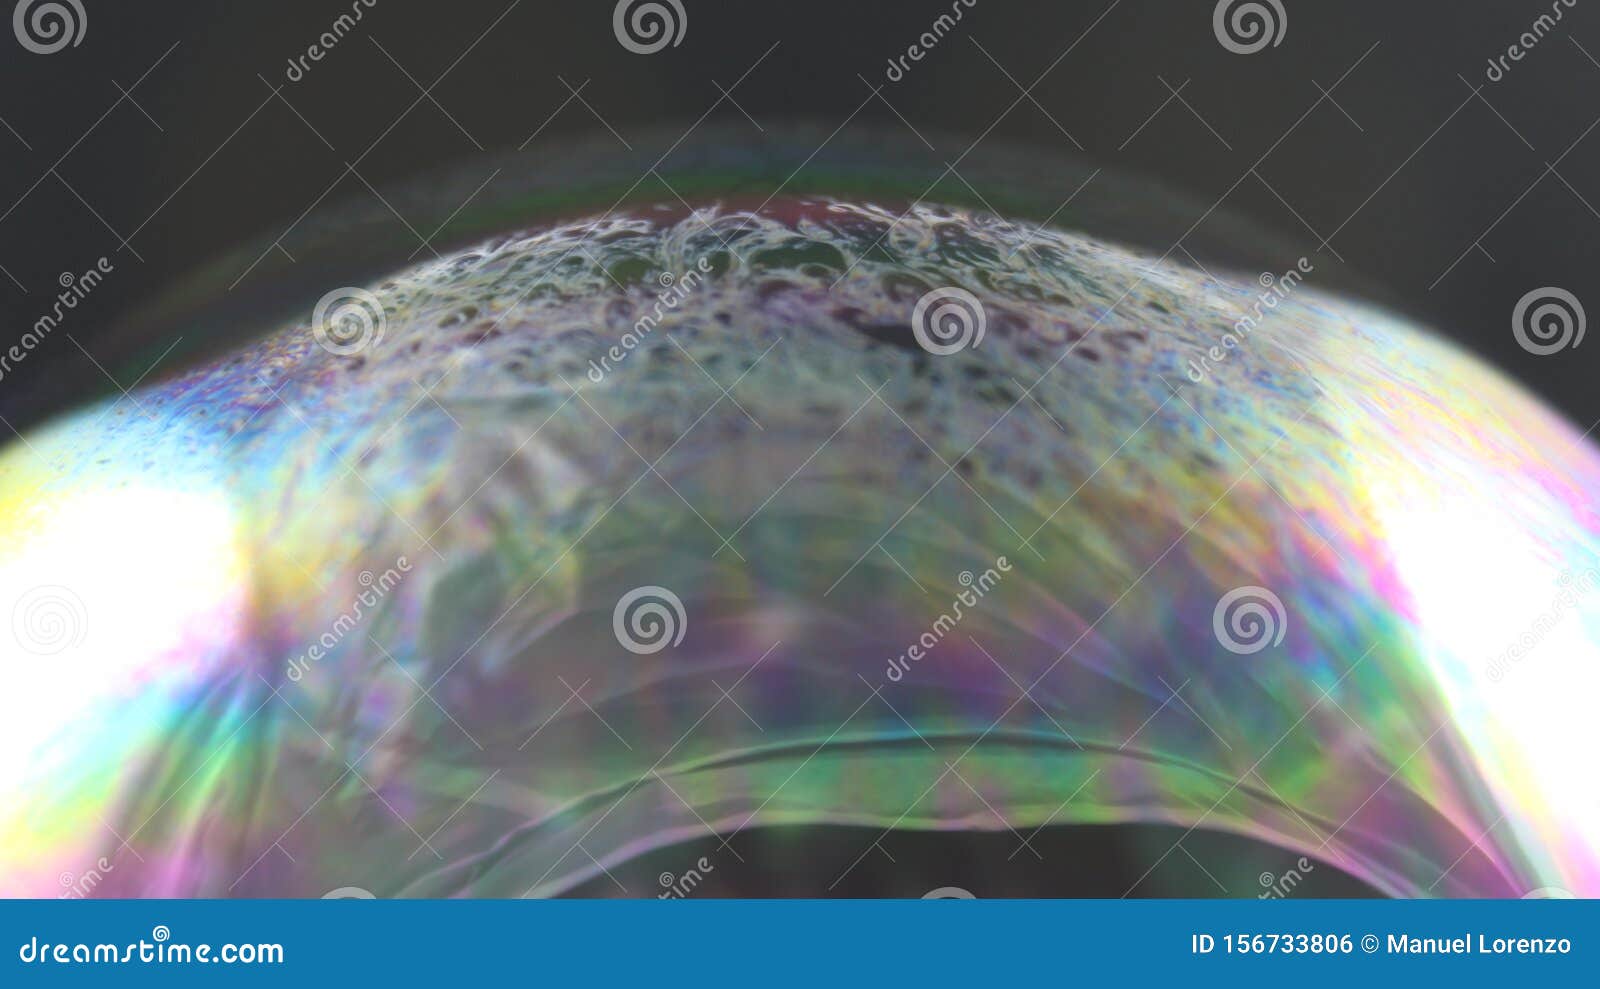 beautiful soap bubble with vivid colors and very different to all